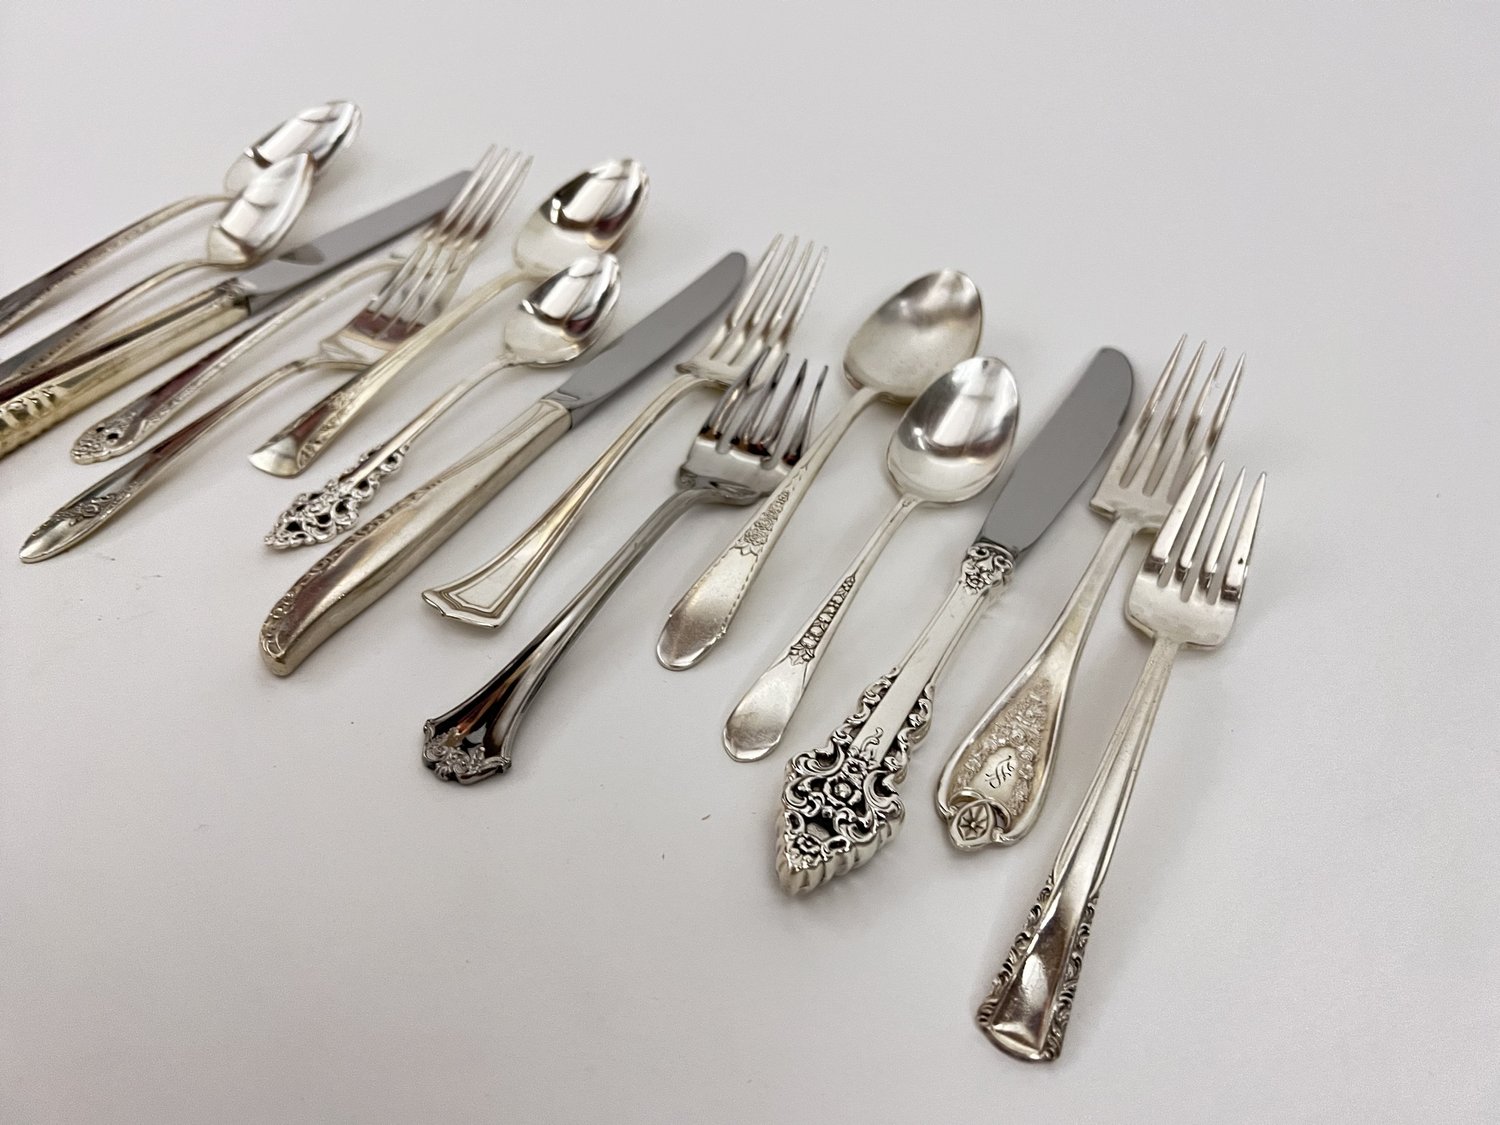 Chattanooga Area Flatware and Dishware Rentals-Eclectic Vintage Silverware